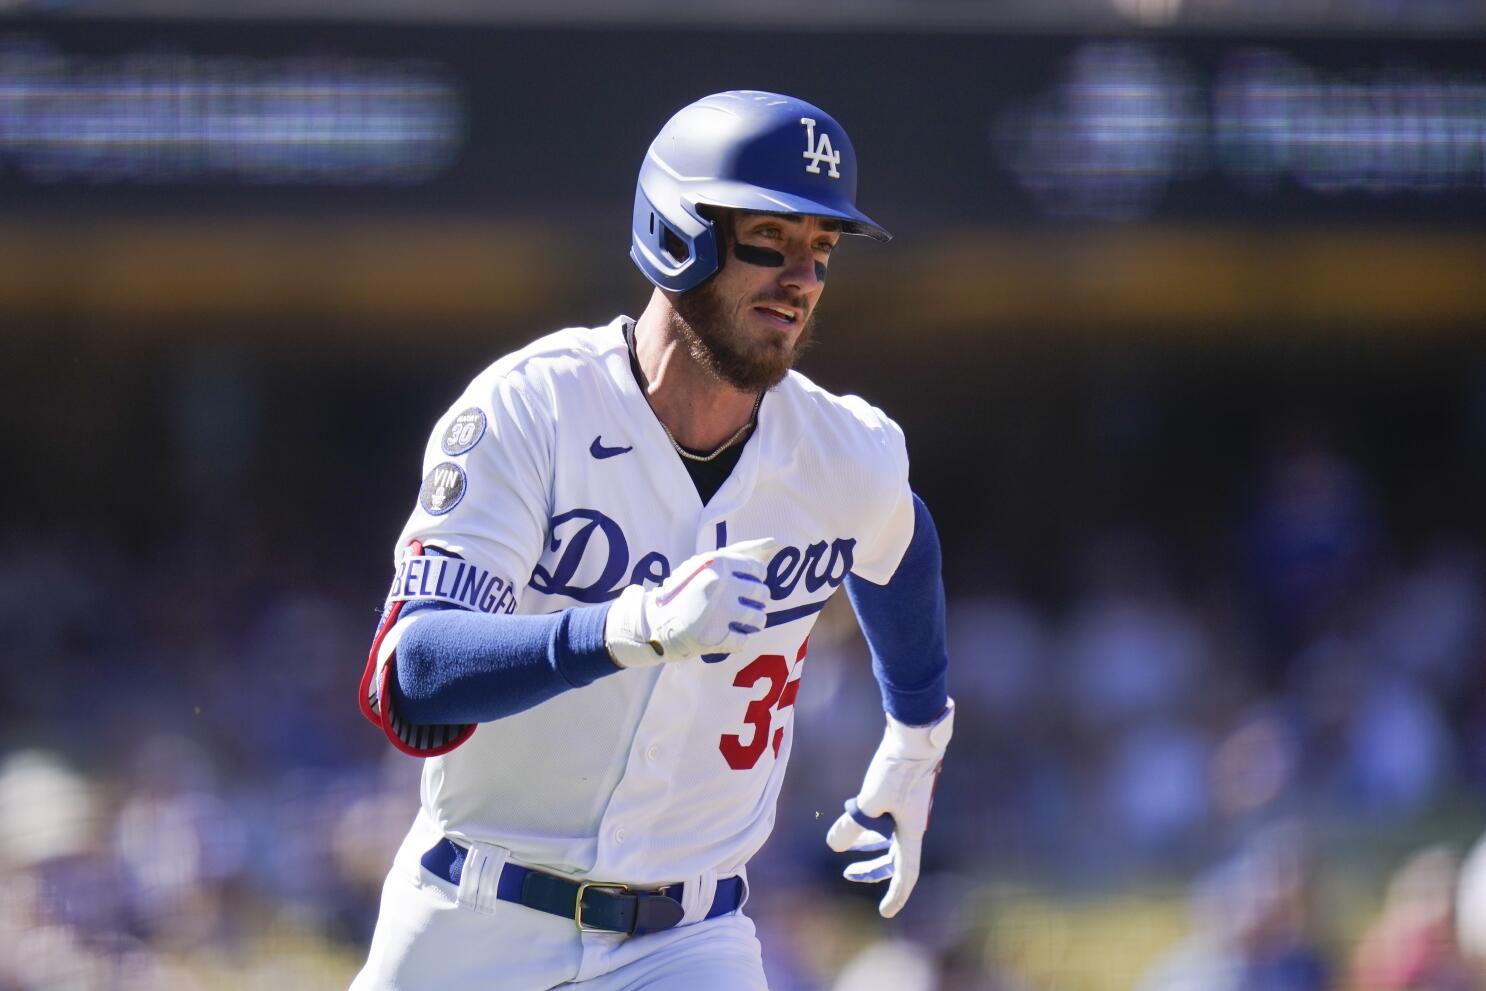 MLB - Name a player hotter than Cody Bellinger right now.